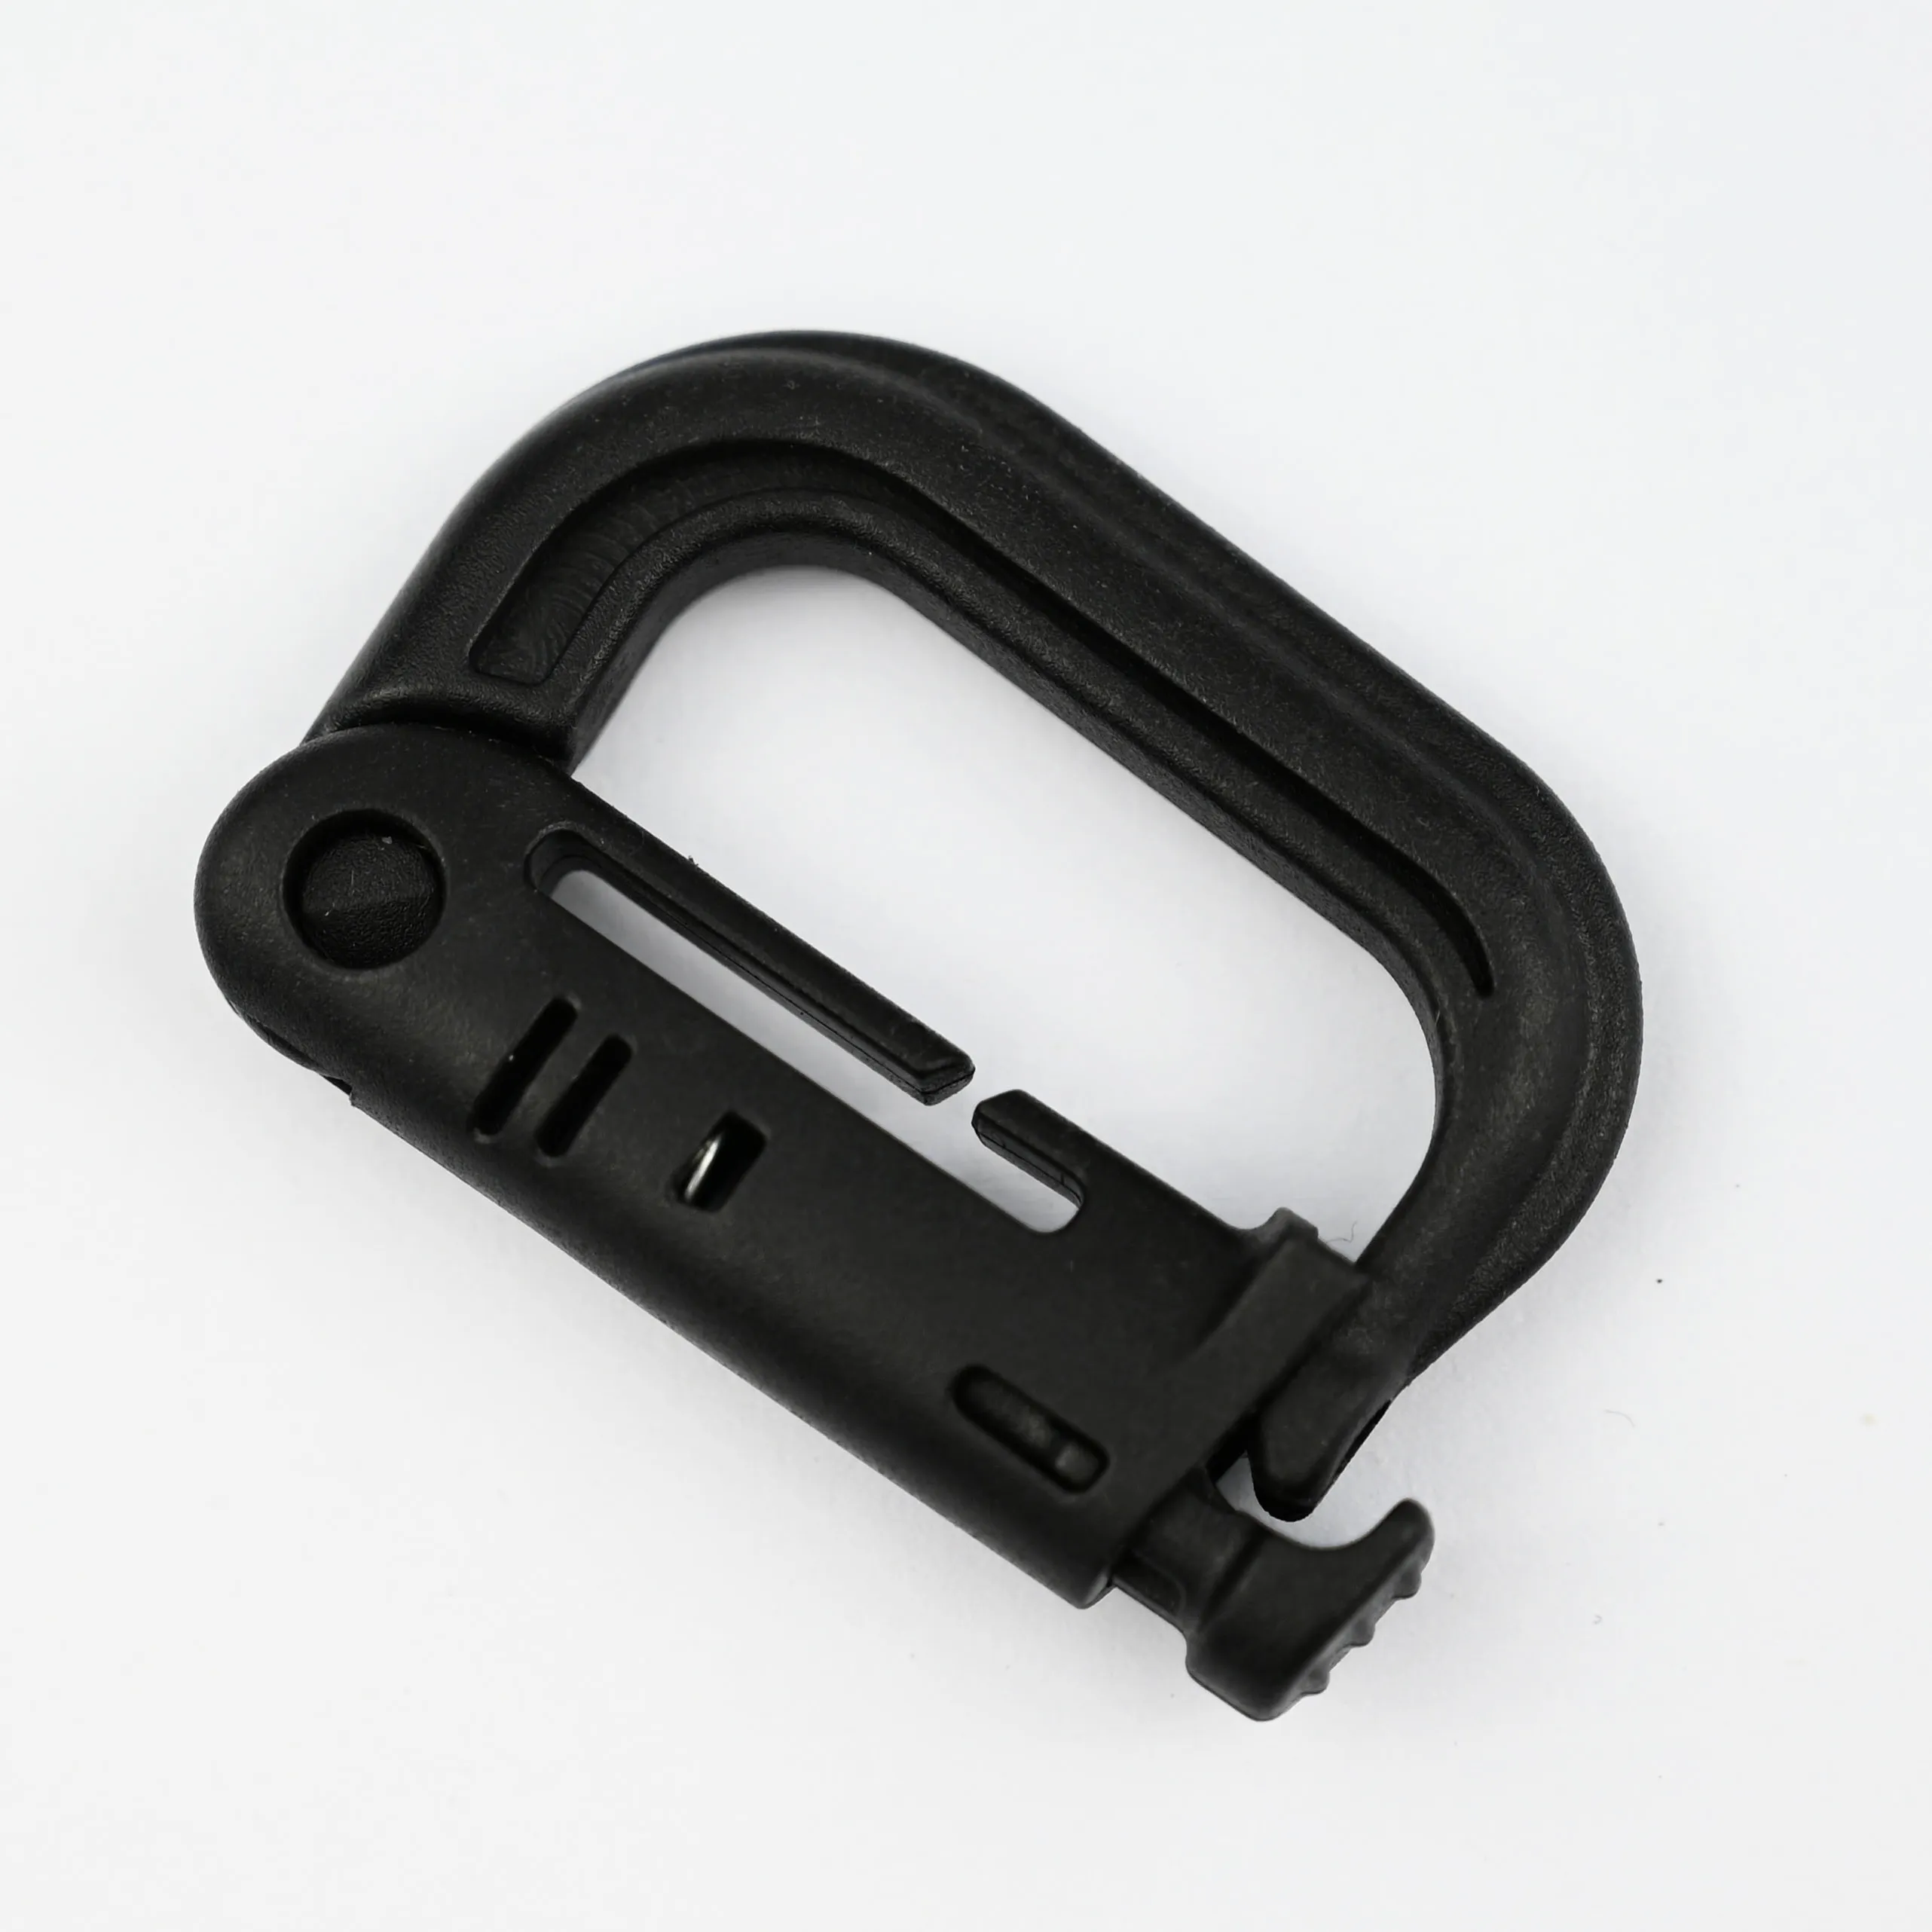 Bag Buckles Black Strap Belt With Plastic Buckle Fittings Luggage Bag Shoulder Strap Buckle For Climbing And Mountain Equipment